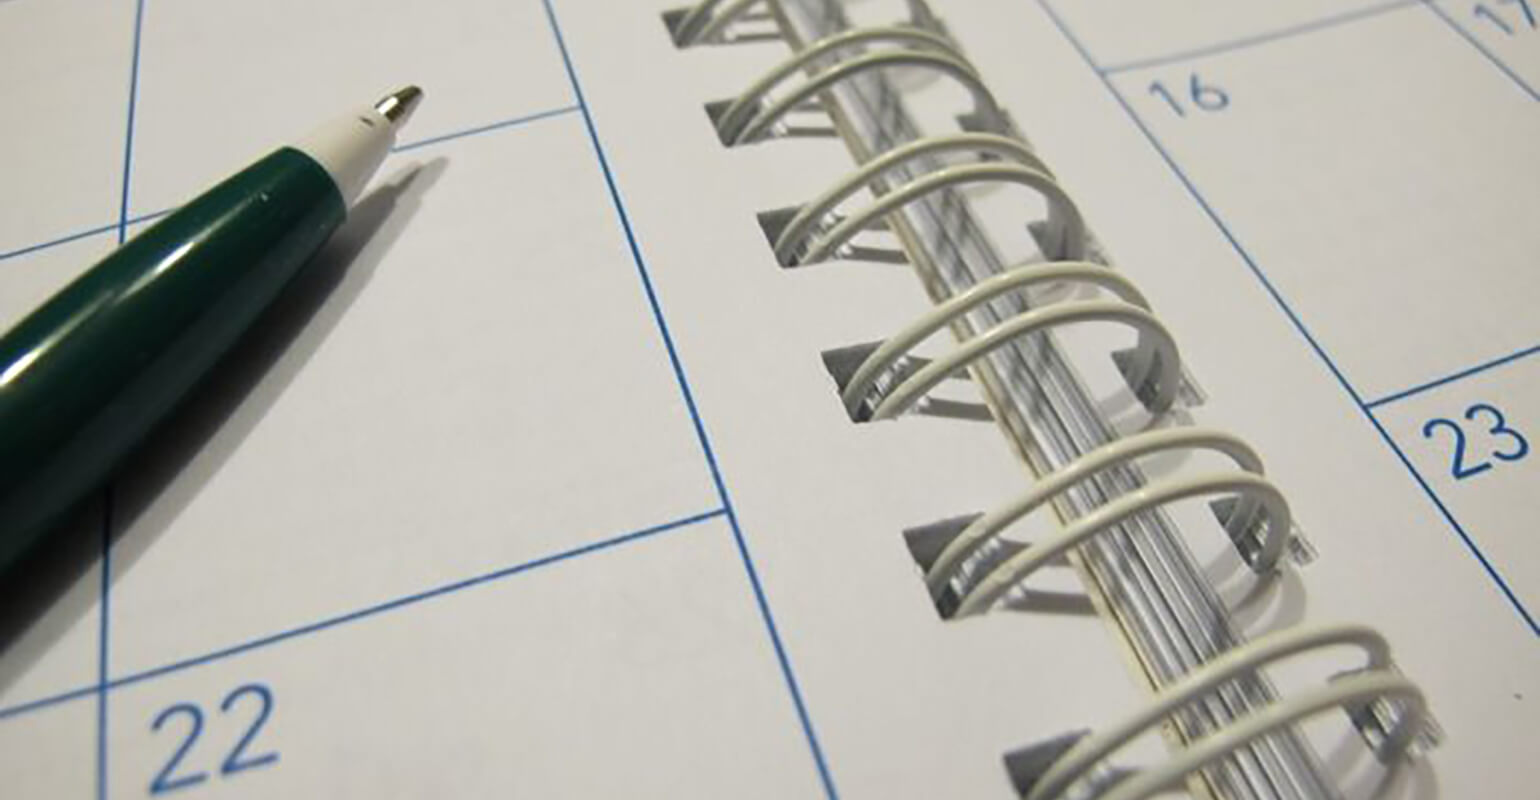 An image of a spiral bound calendar, there is a green pen laid across the left page.